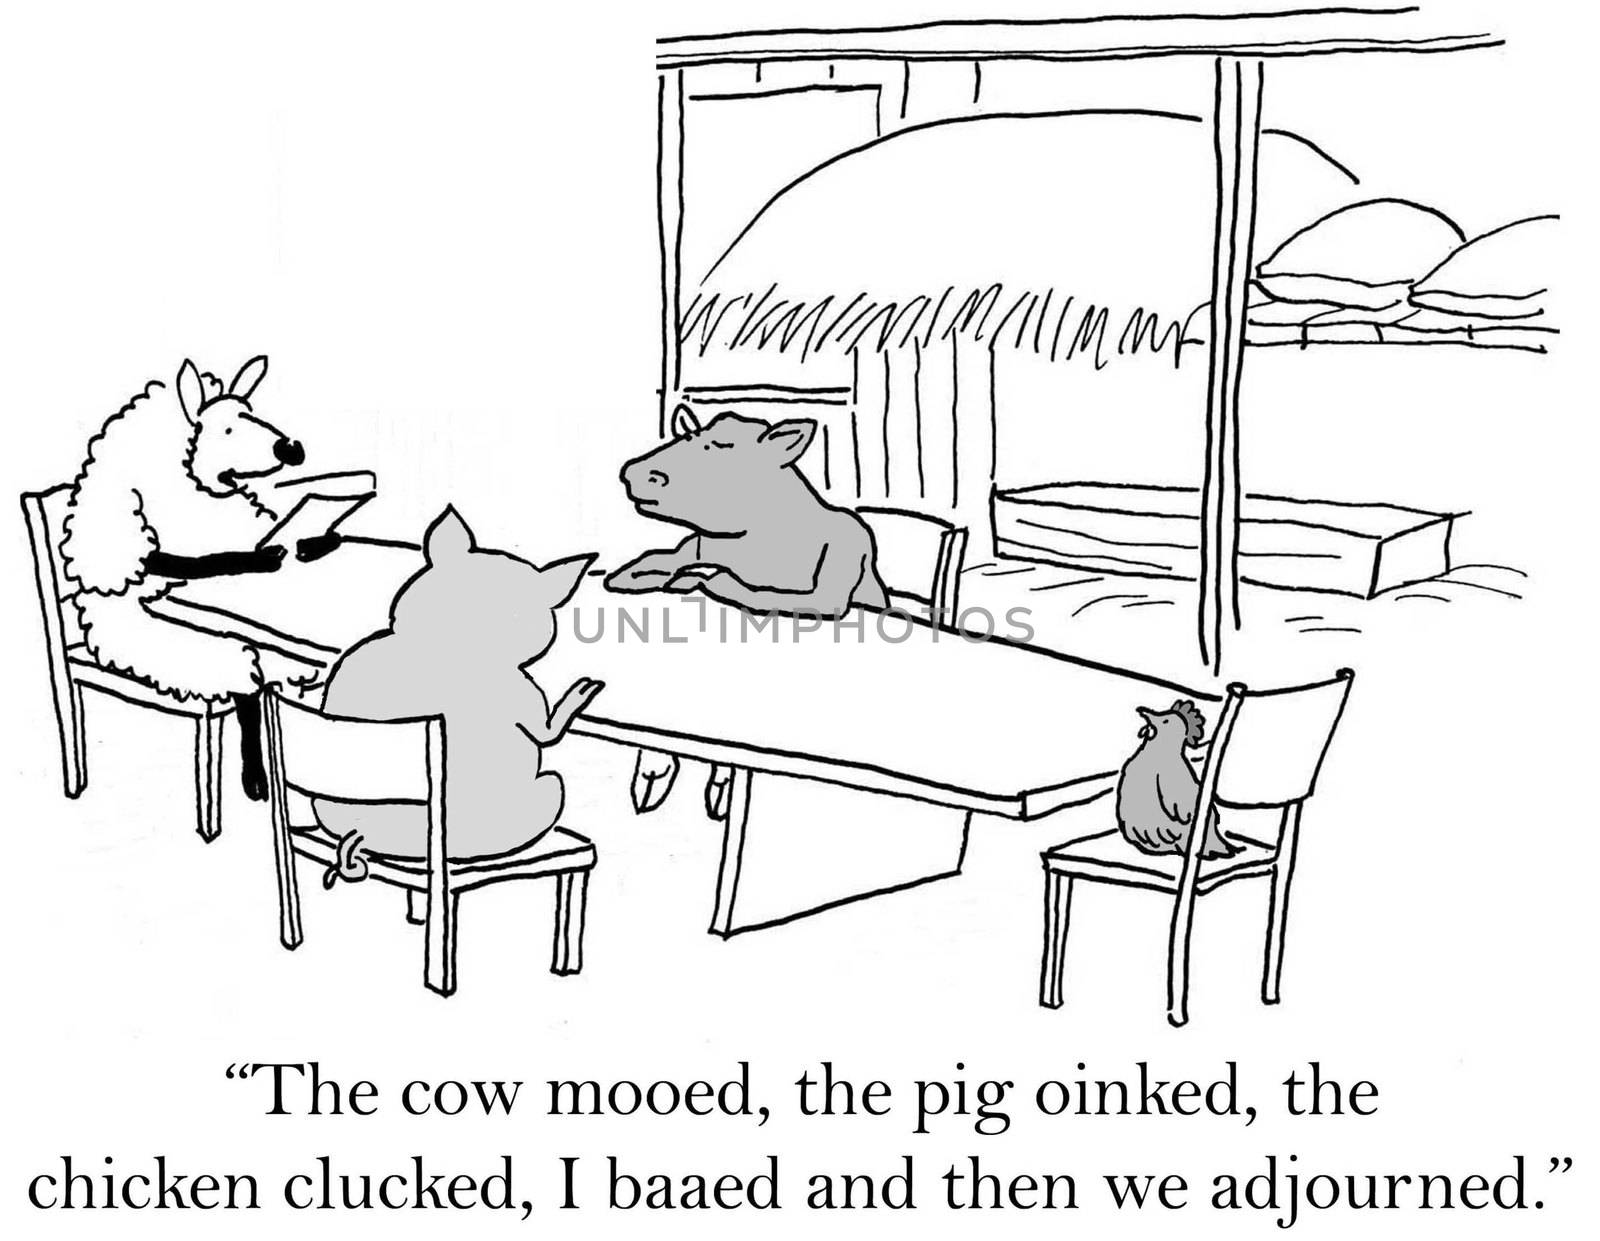 "The cow mooed, the pig oinked, the chicken clucked, I baaed and them we went home."